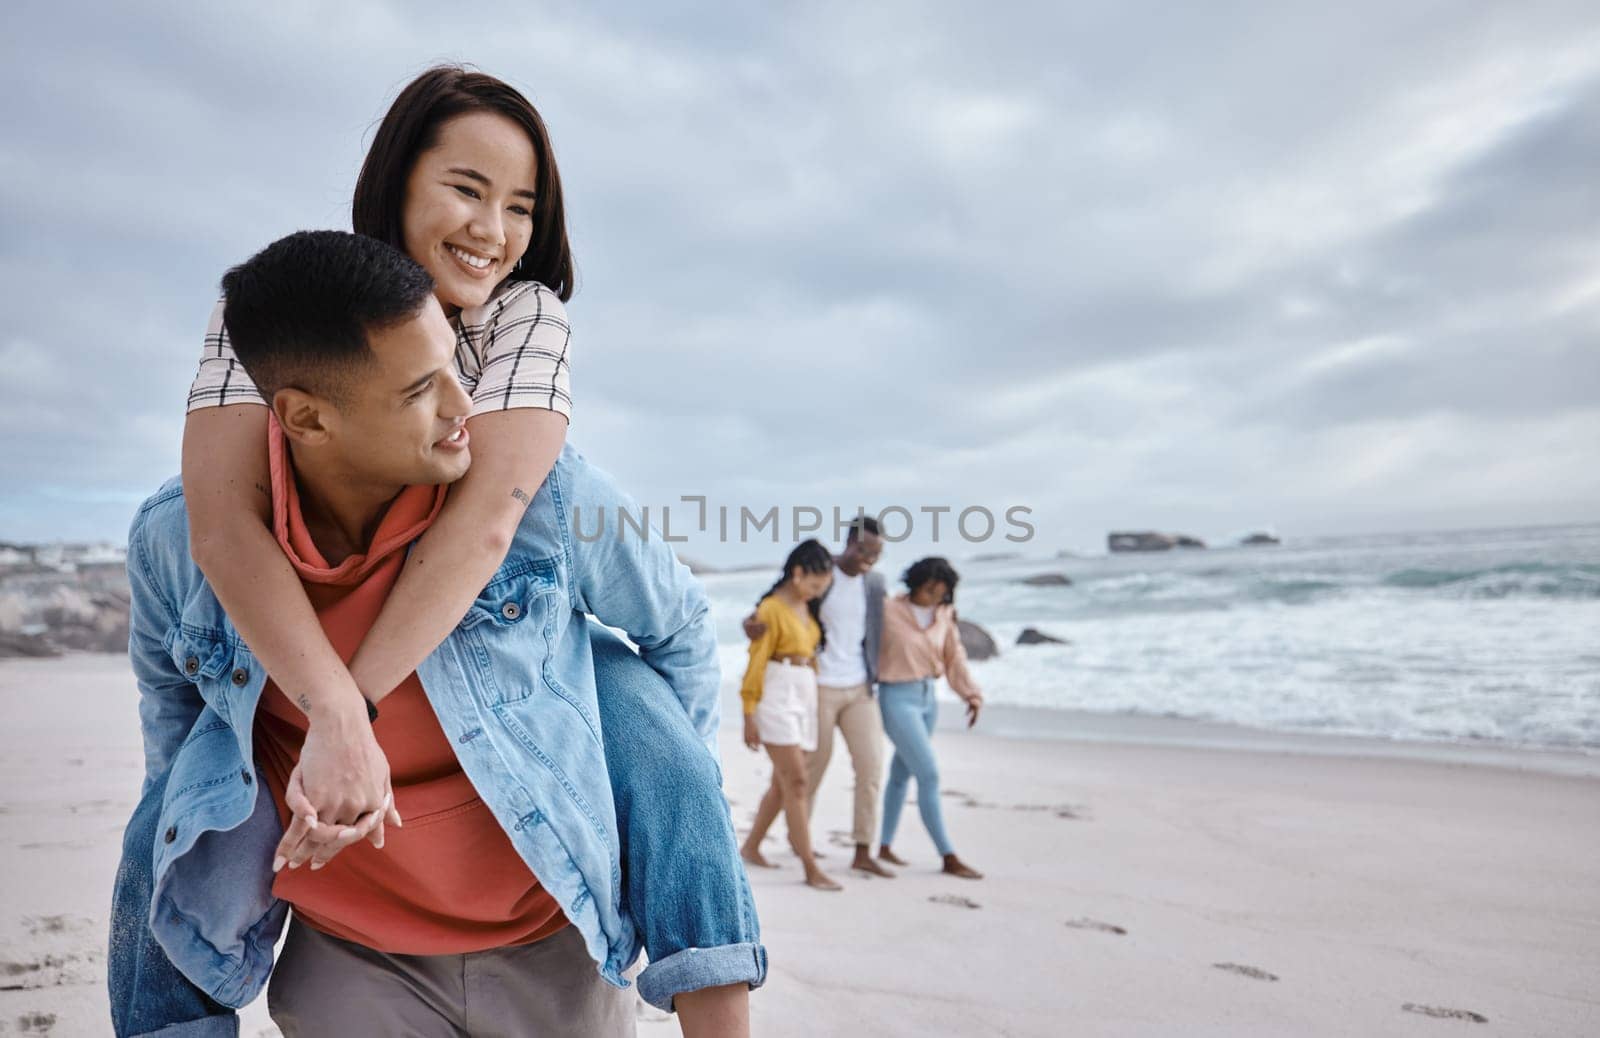 Happy, piggyback or couple of friends at a beach on a relaxing holiday vacation bonding in nature together. Love, man and Asian woman with smile at sea enjoys traveling on ocean trips in Miami, USA.